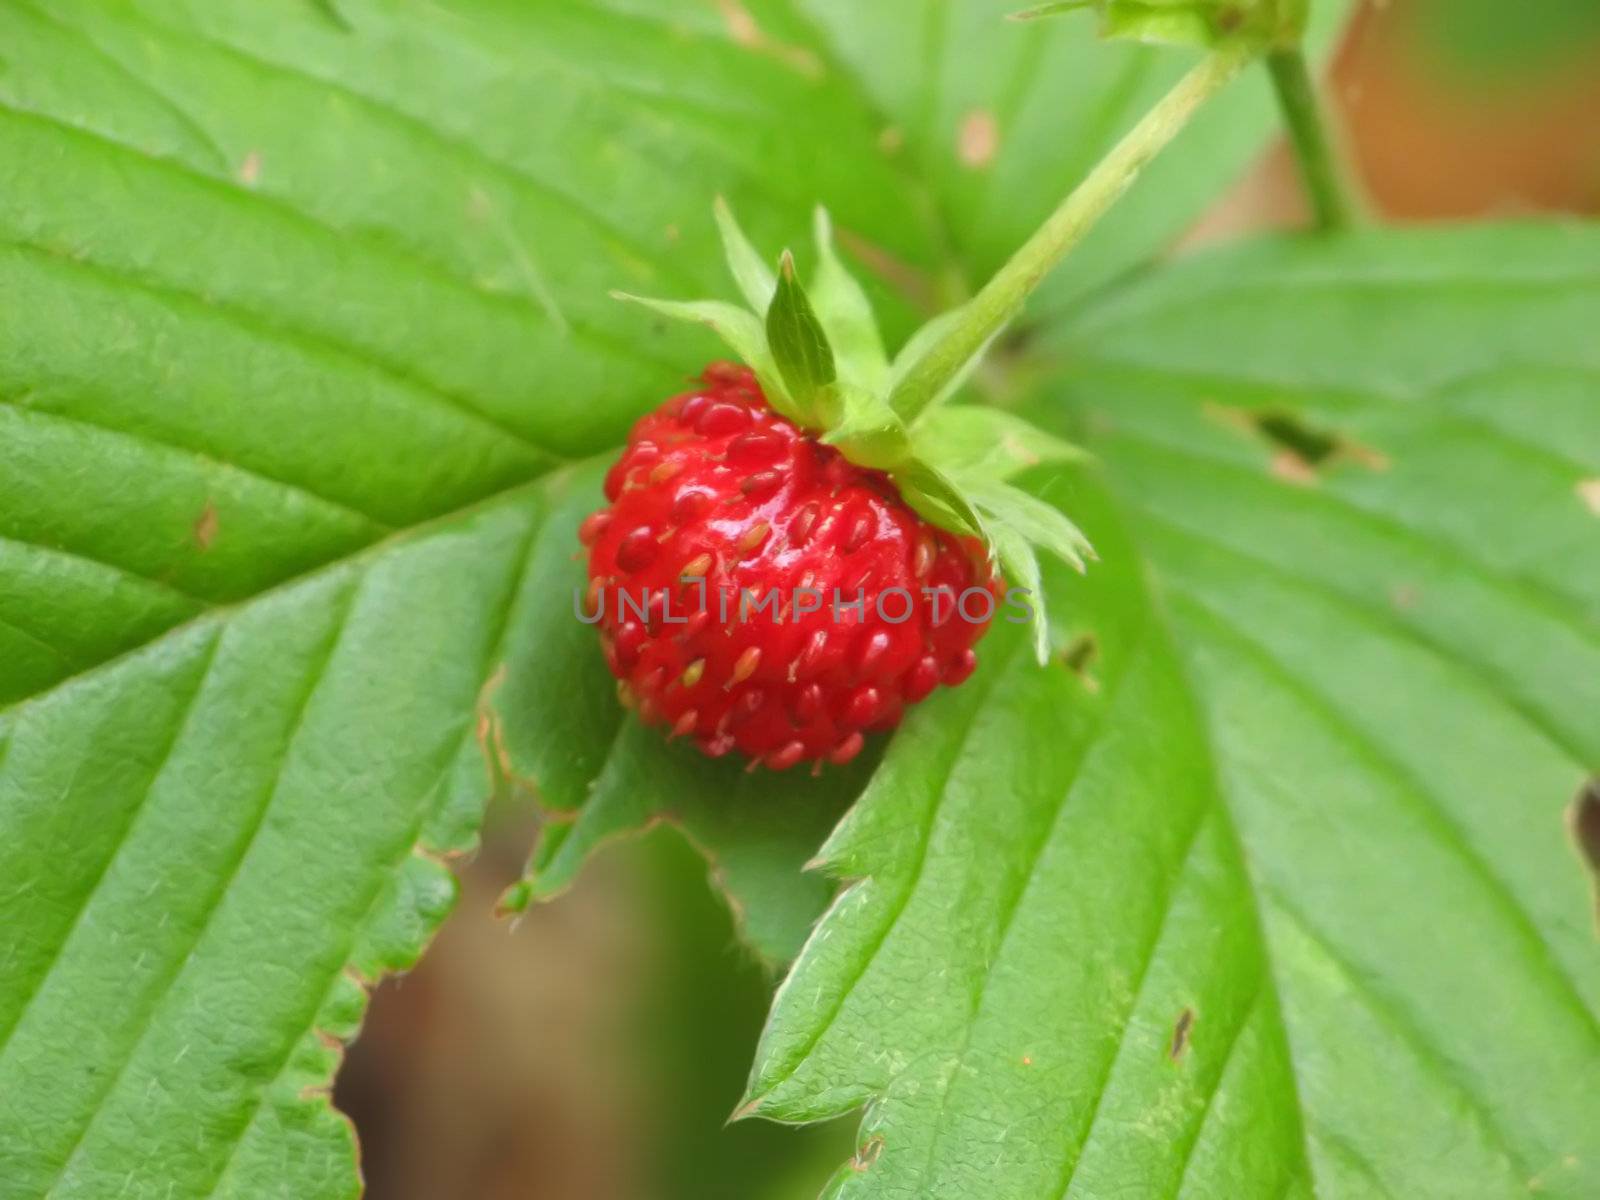 This image shows a strawberry from forest